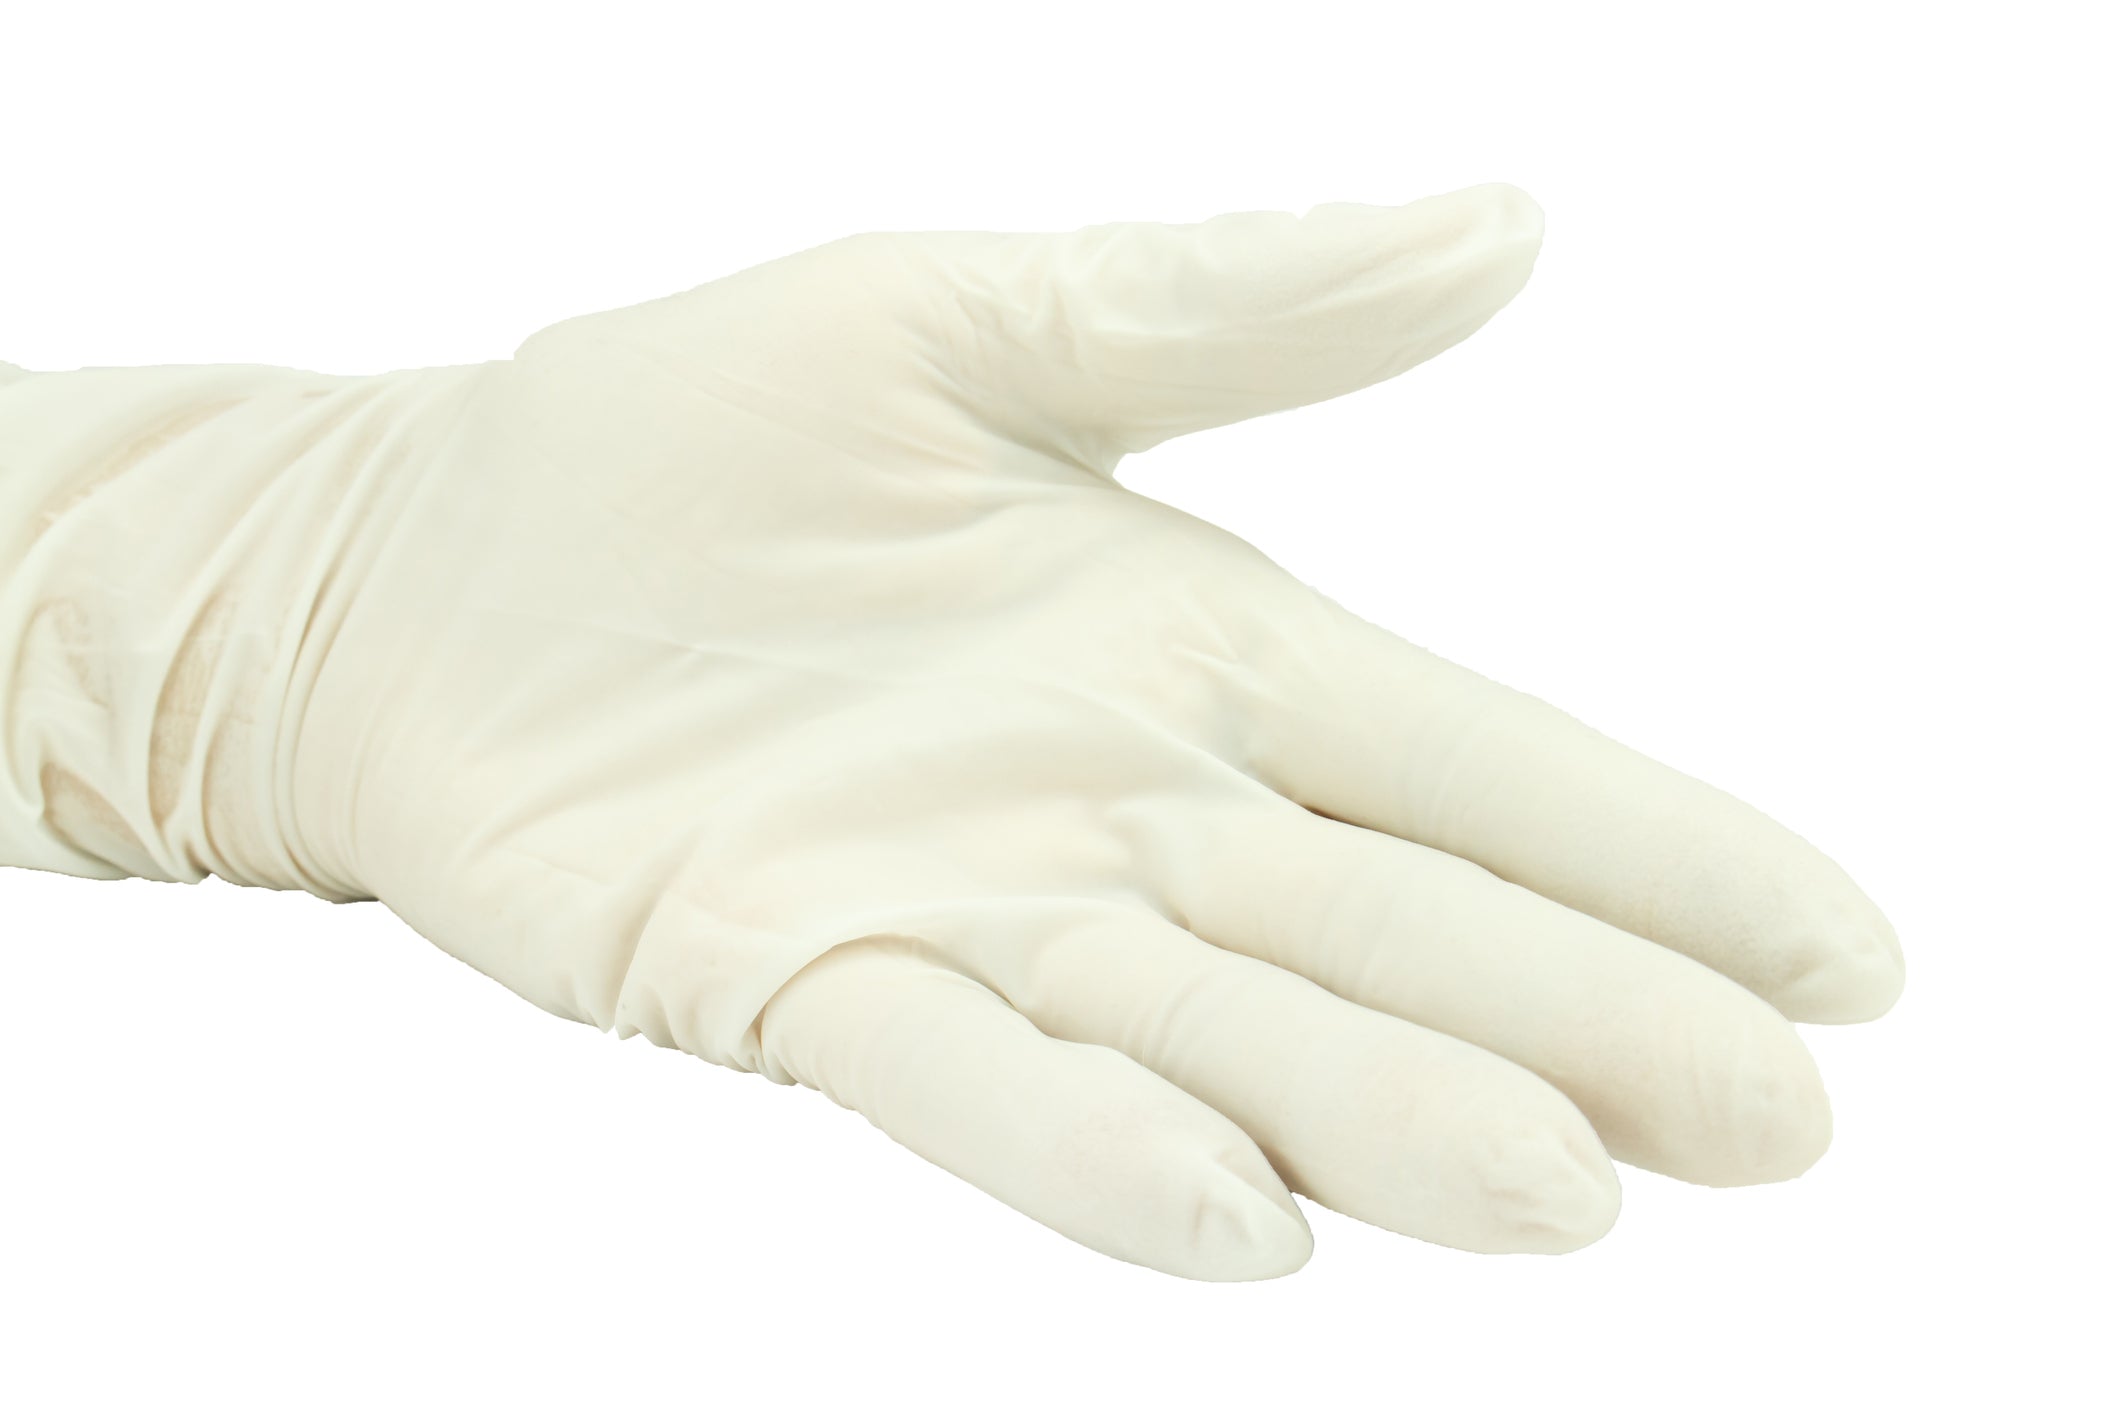 Latex Gloves in a Bag Starting at 3.5 Mil - Powder-Free